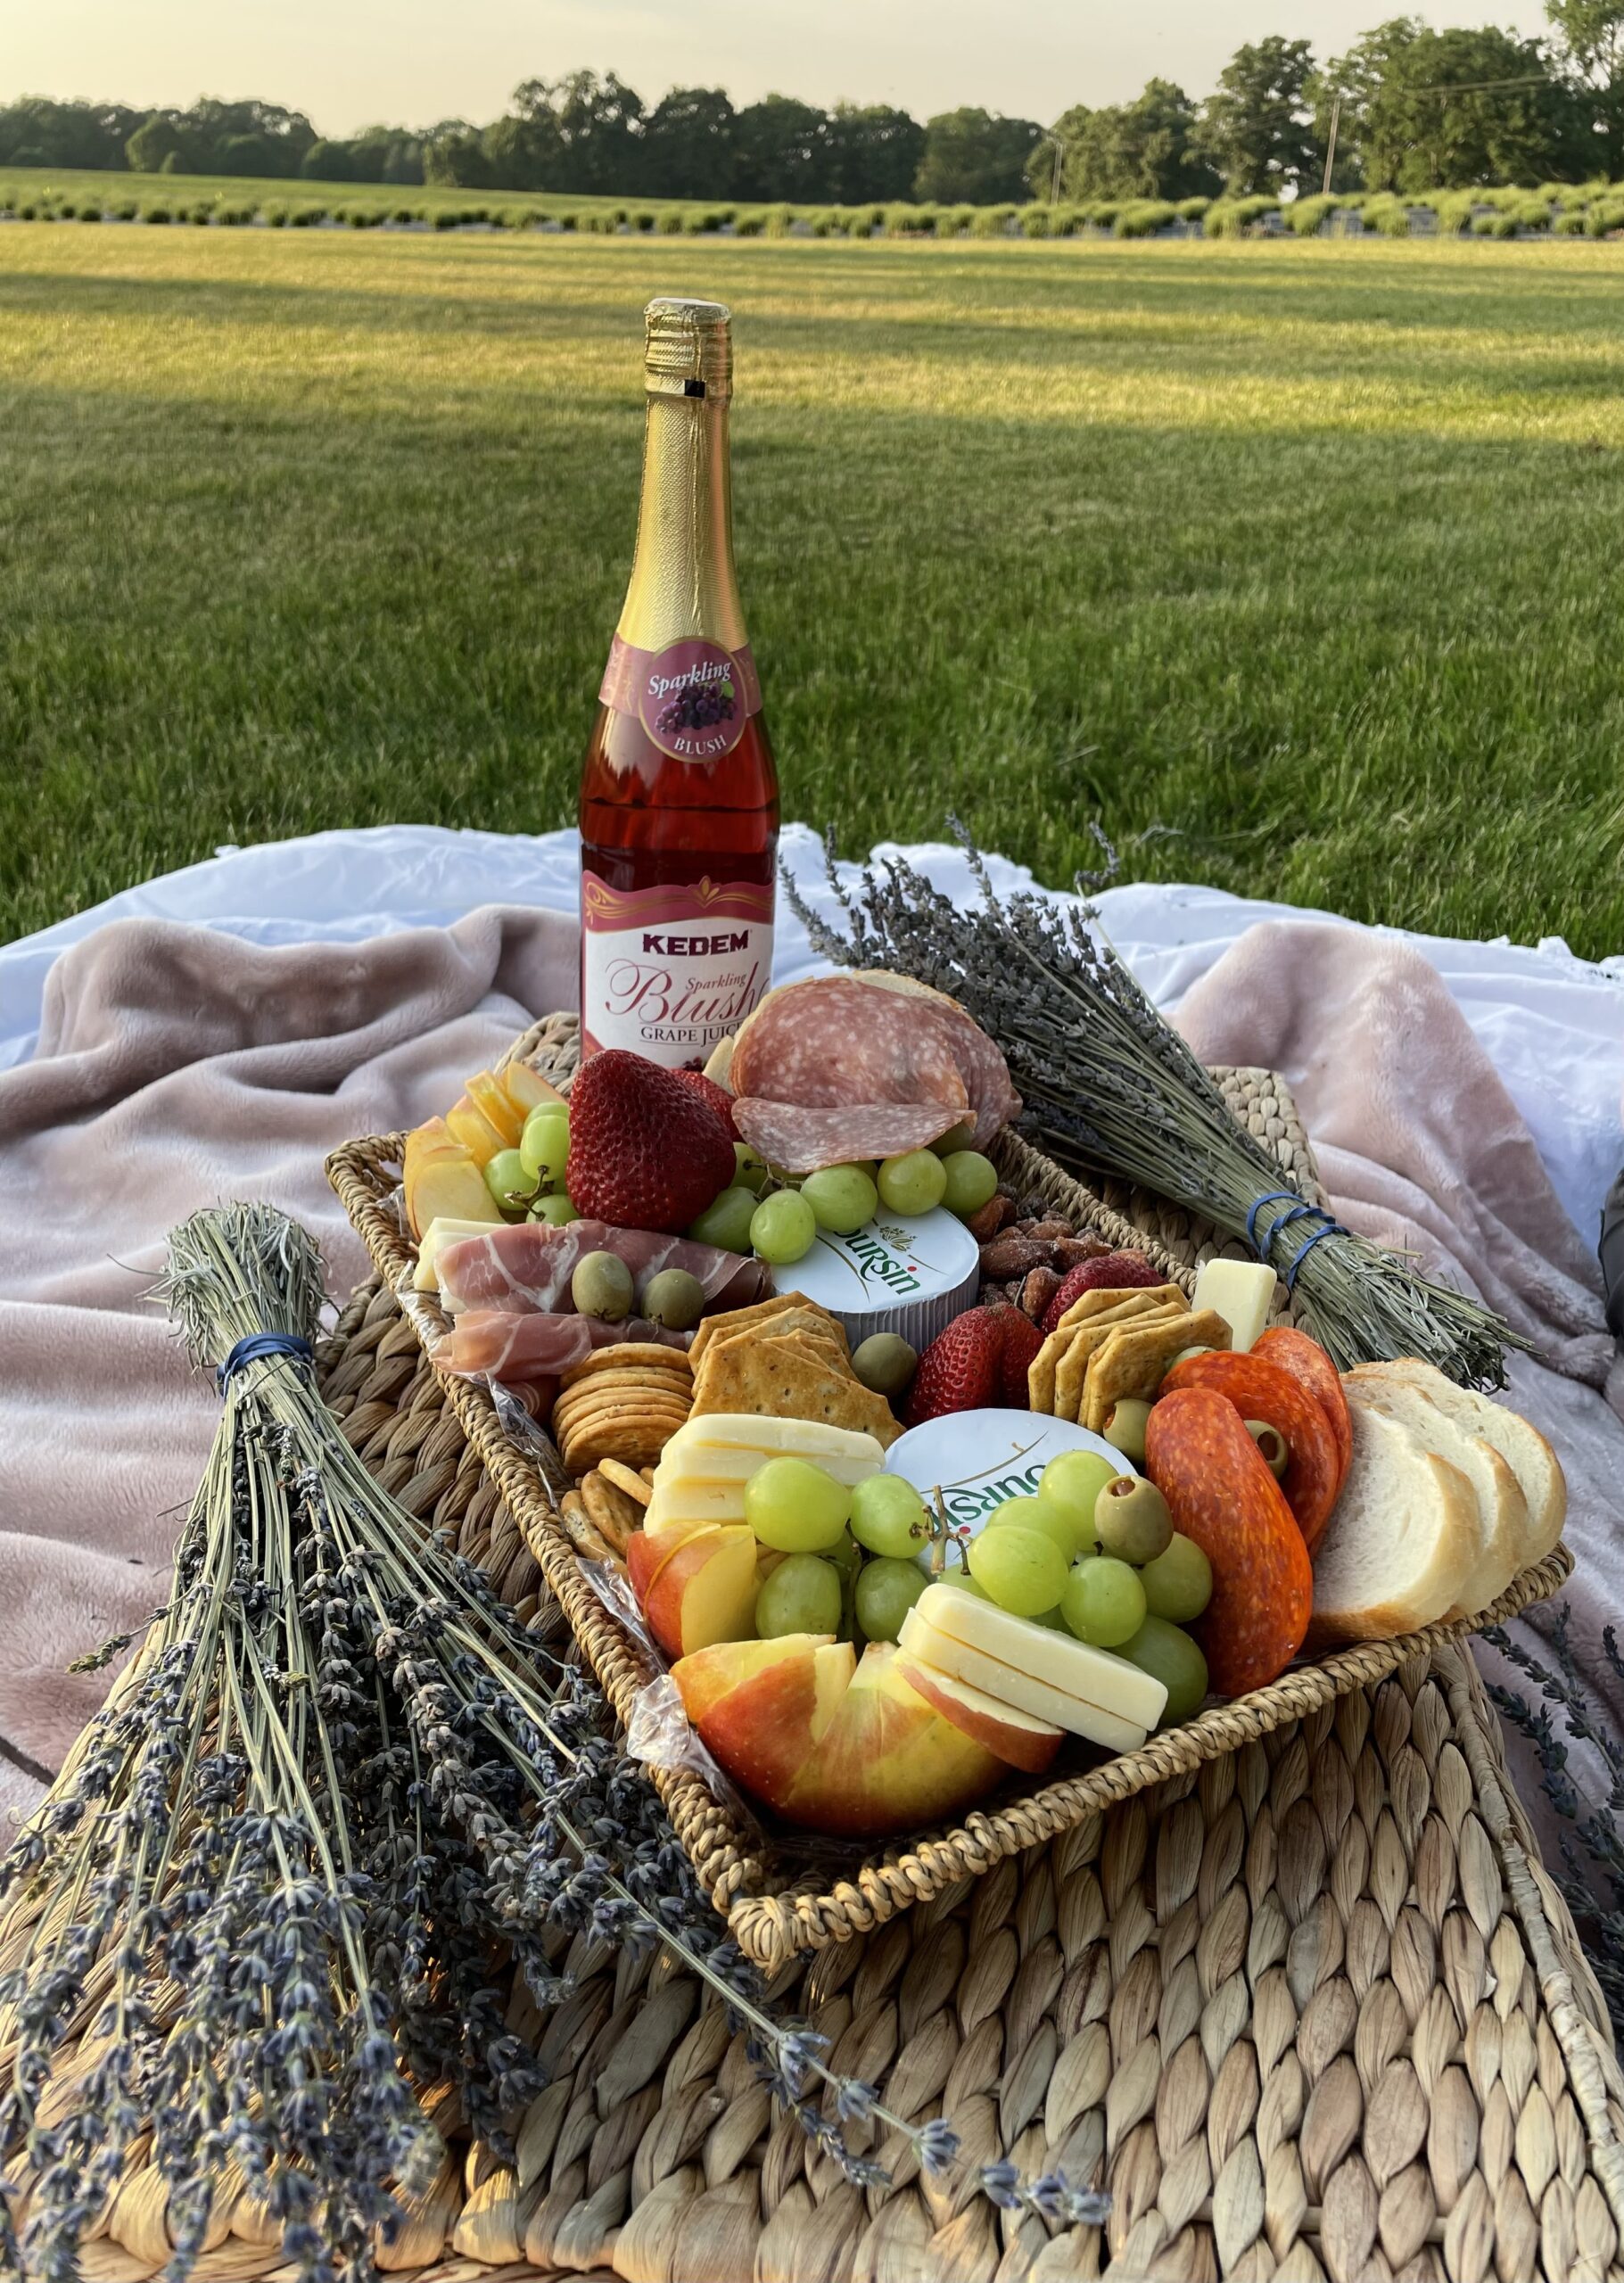 Chopped apple, grapes, variety of deli meats, sparkling juice on a picnic.